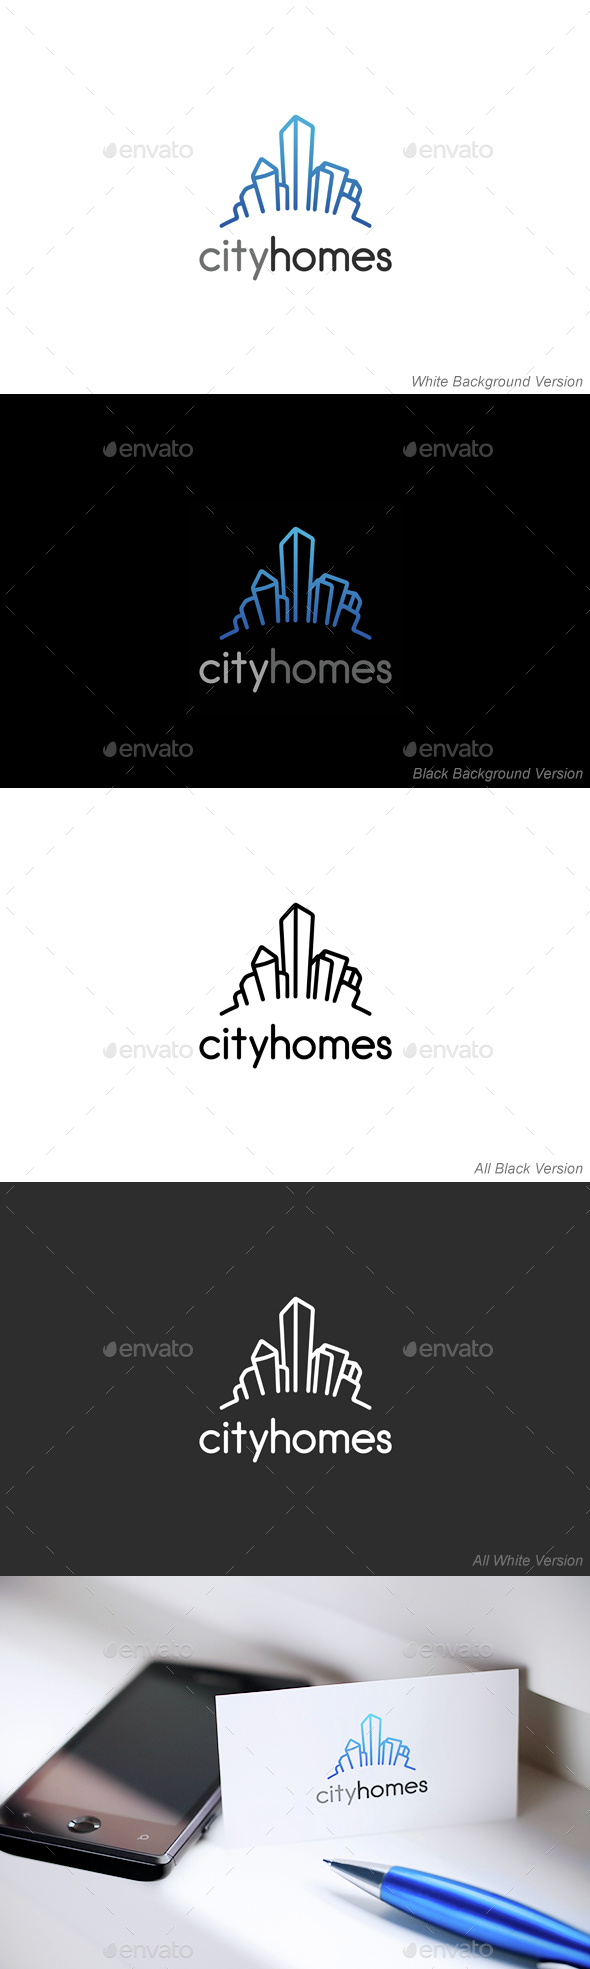 Real Estate or Building Company Logo